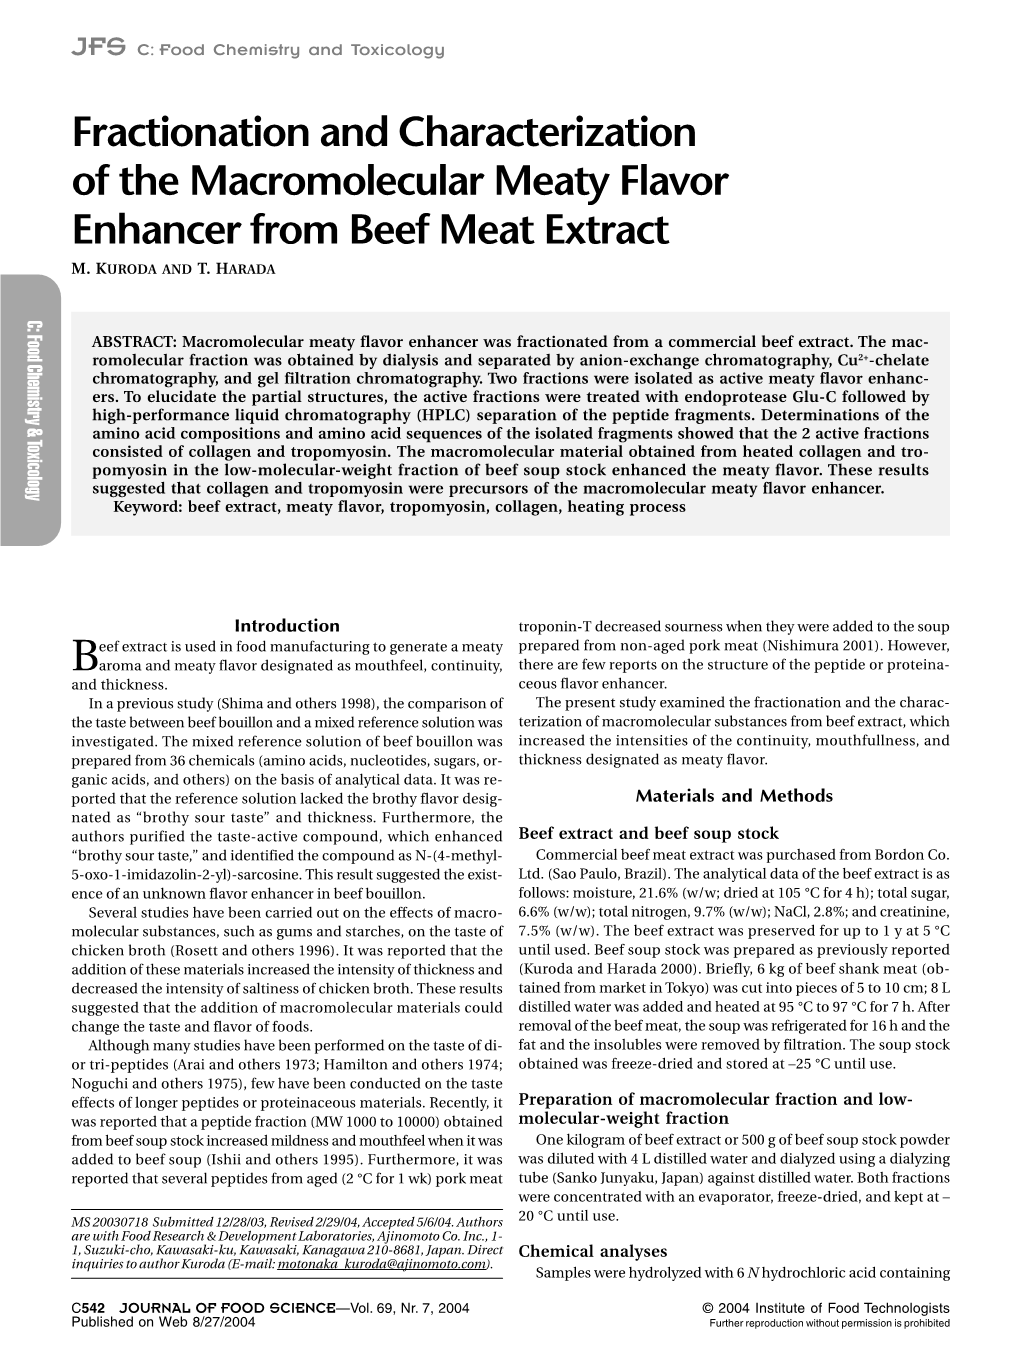 Fractionation and Characterization of the Macromolecular Meaty Flavor Enhancer from Beef Meat Extract M